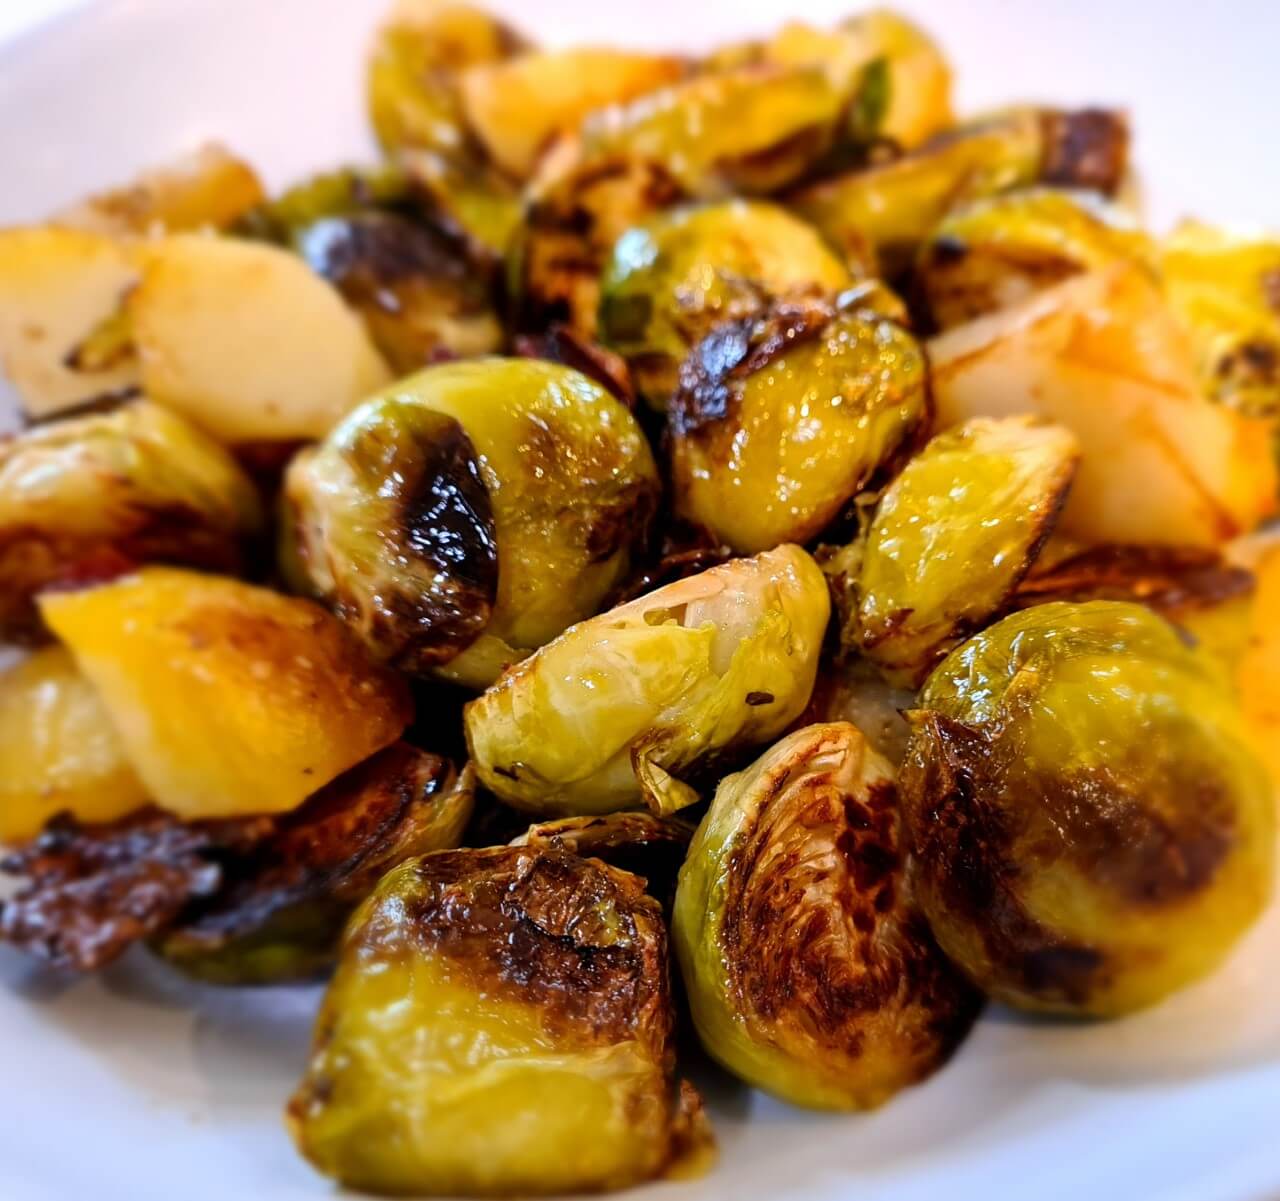 brussel sprouts - how to reduce food waste at Christmas